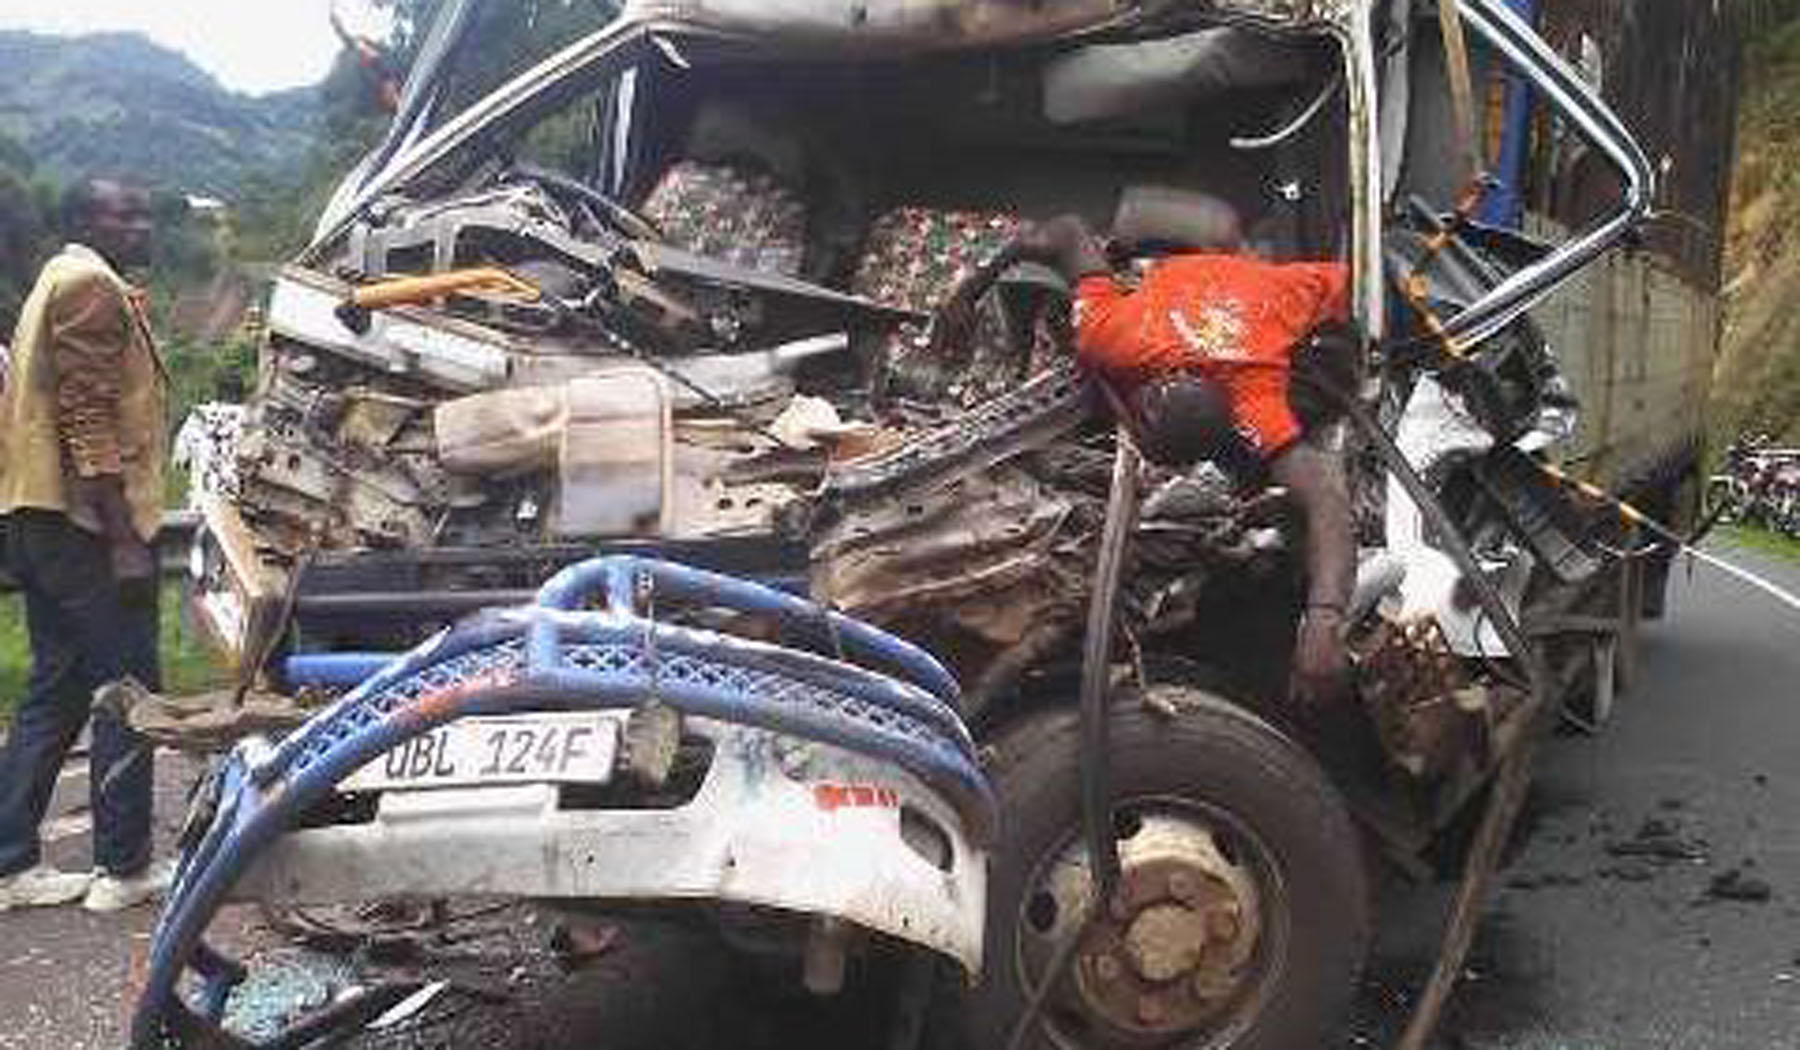 The Kisoro-Kabale Fatal Road Accident Leads To A Tragic Demise Of A Turn Man.